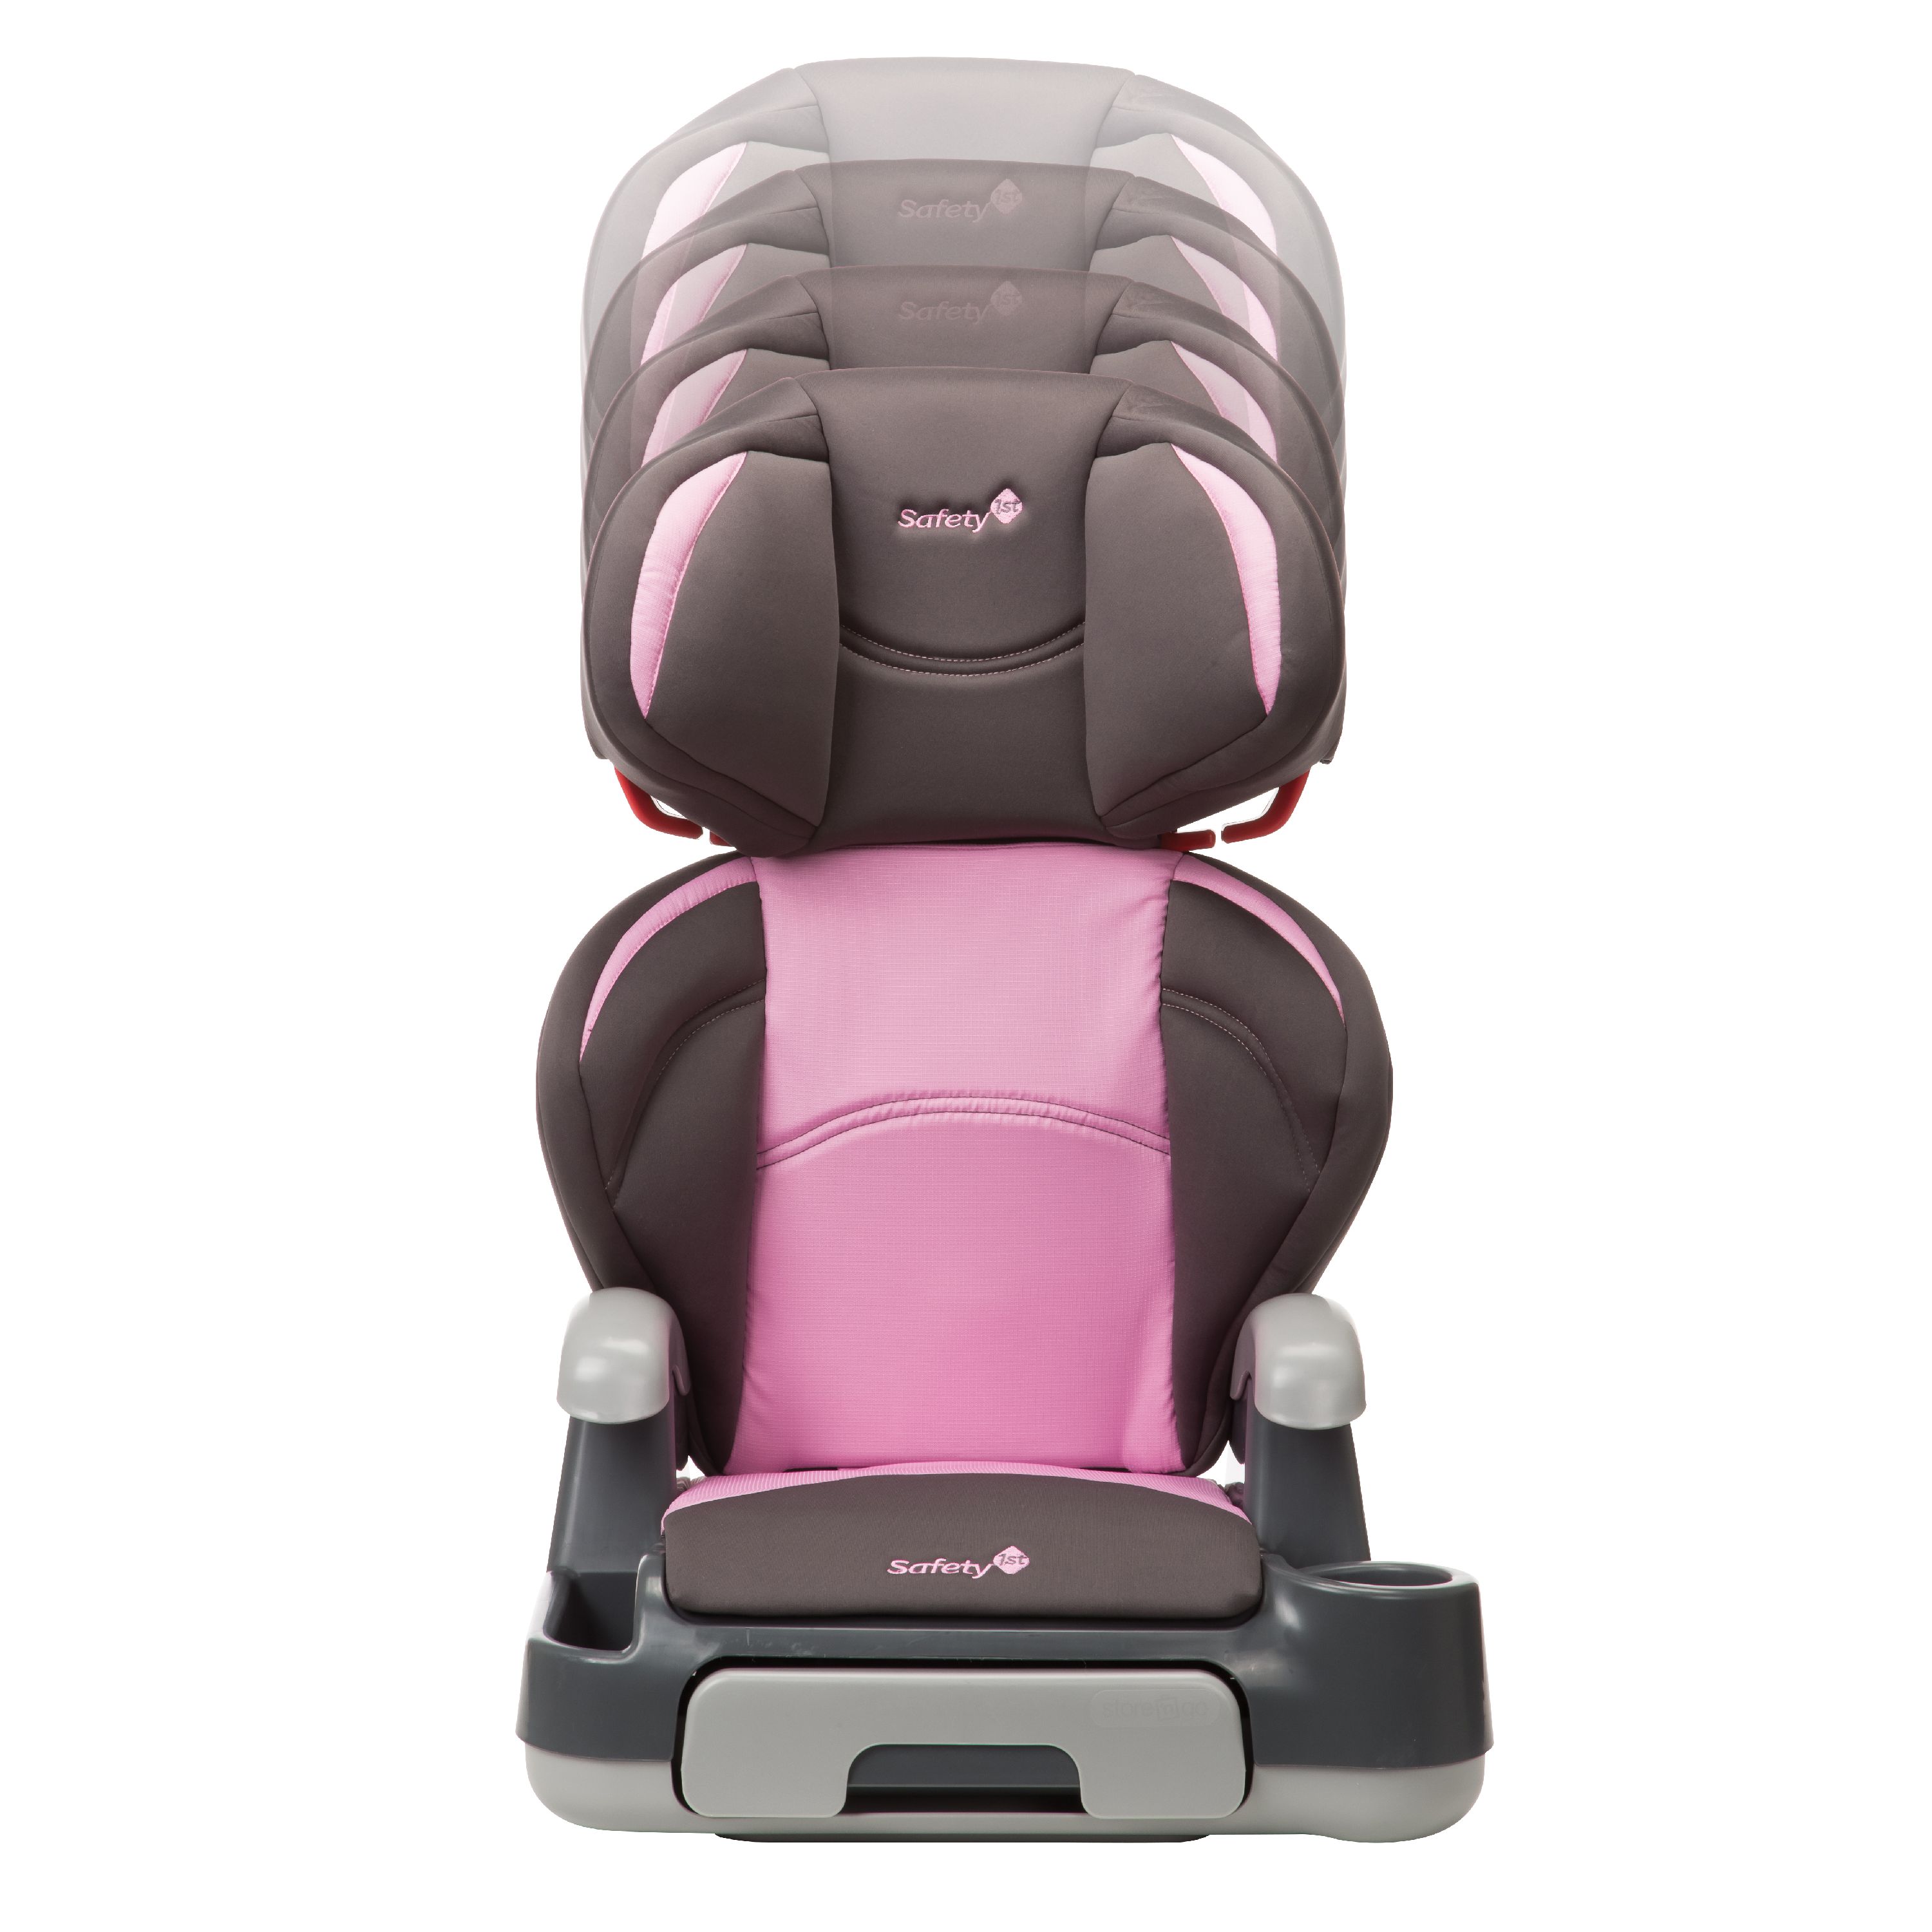 Safety 1st Store 'n Go Belt-Positioning Booster Car Seat, Nora - image 5 of 5